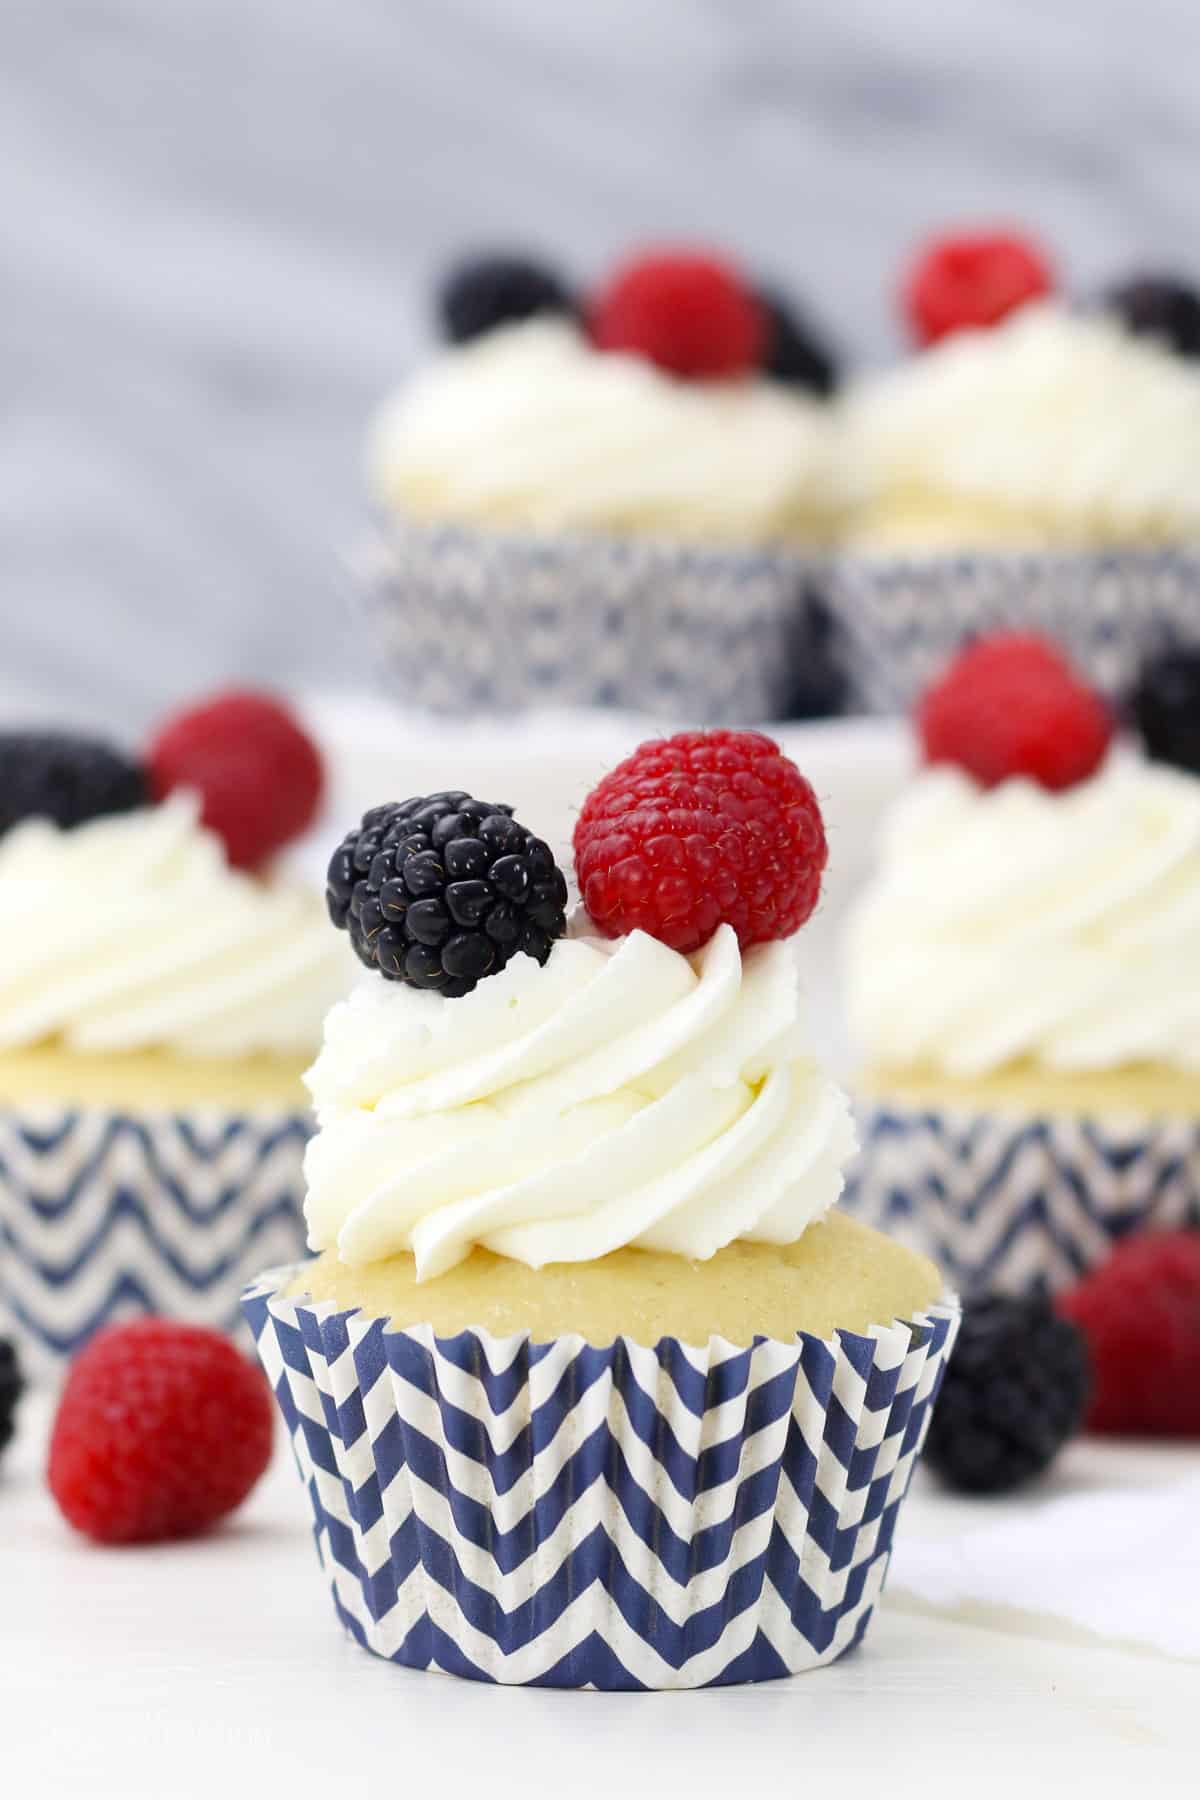 A cupcake in a blue and white striped cupcake liner frosted with a swirl of mascarpone whipped cream and topped with fresh berries, with more frosted cupcakes in the background.